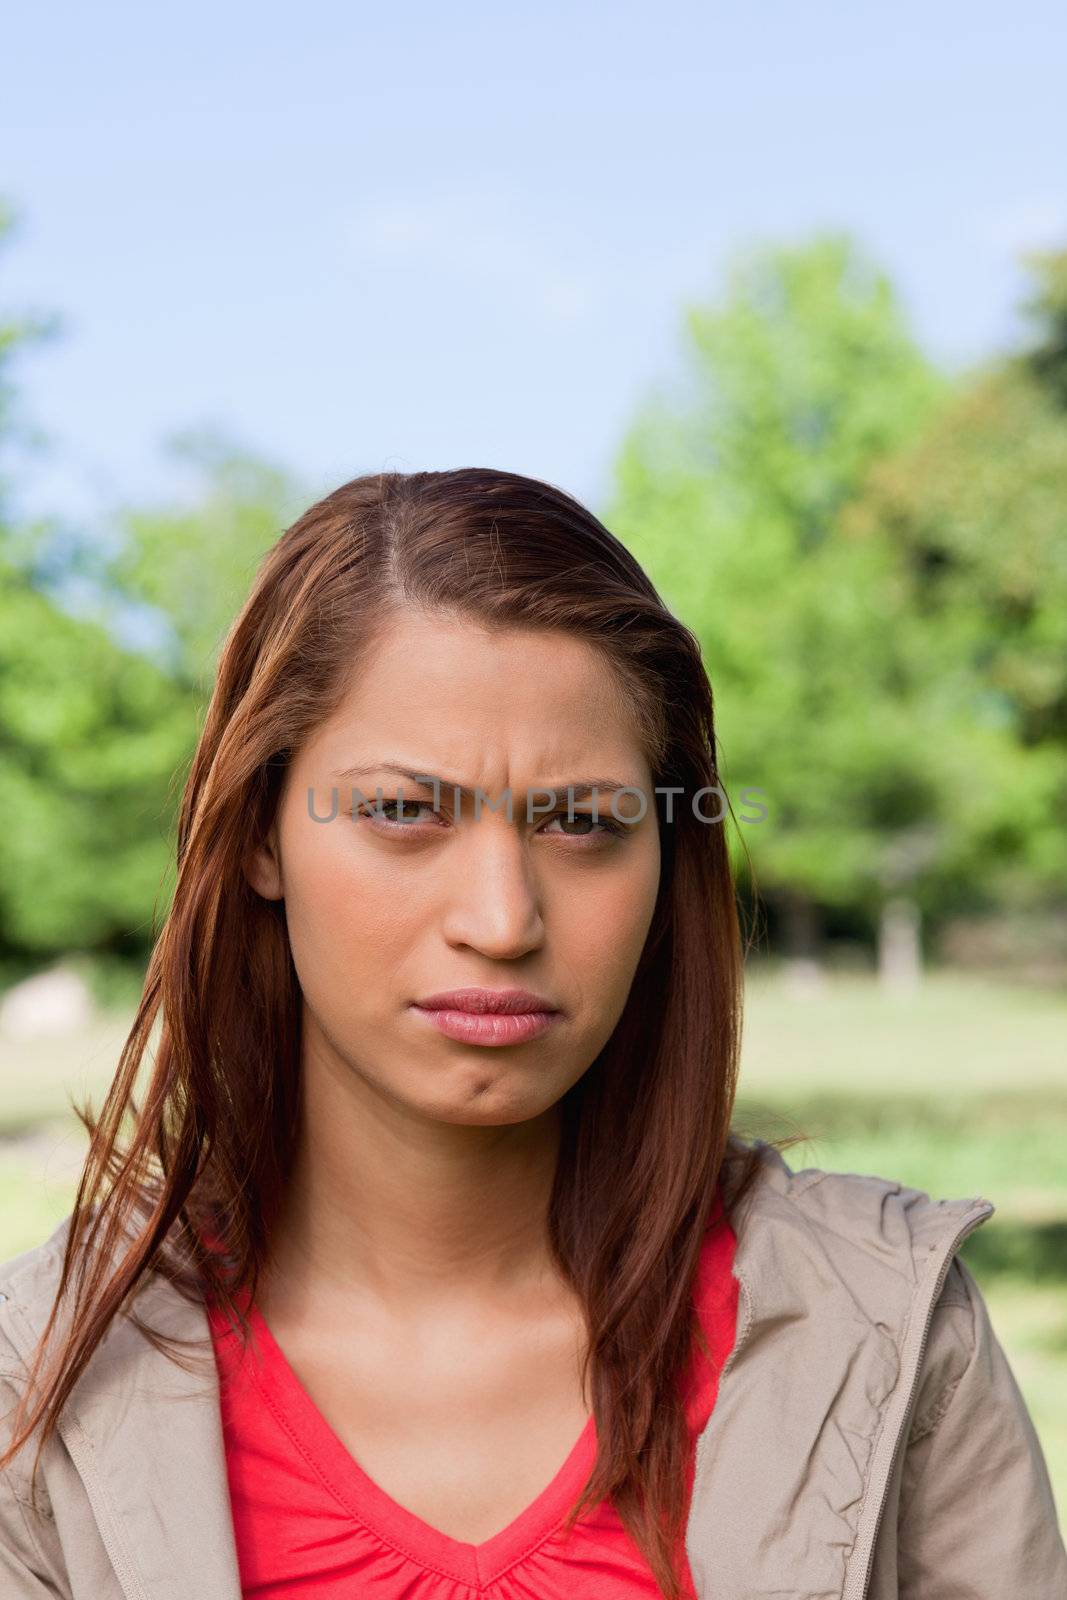 Woman looking ahead of her with a serious expression on her face by Wavebreakmedia